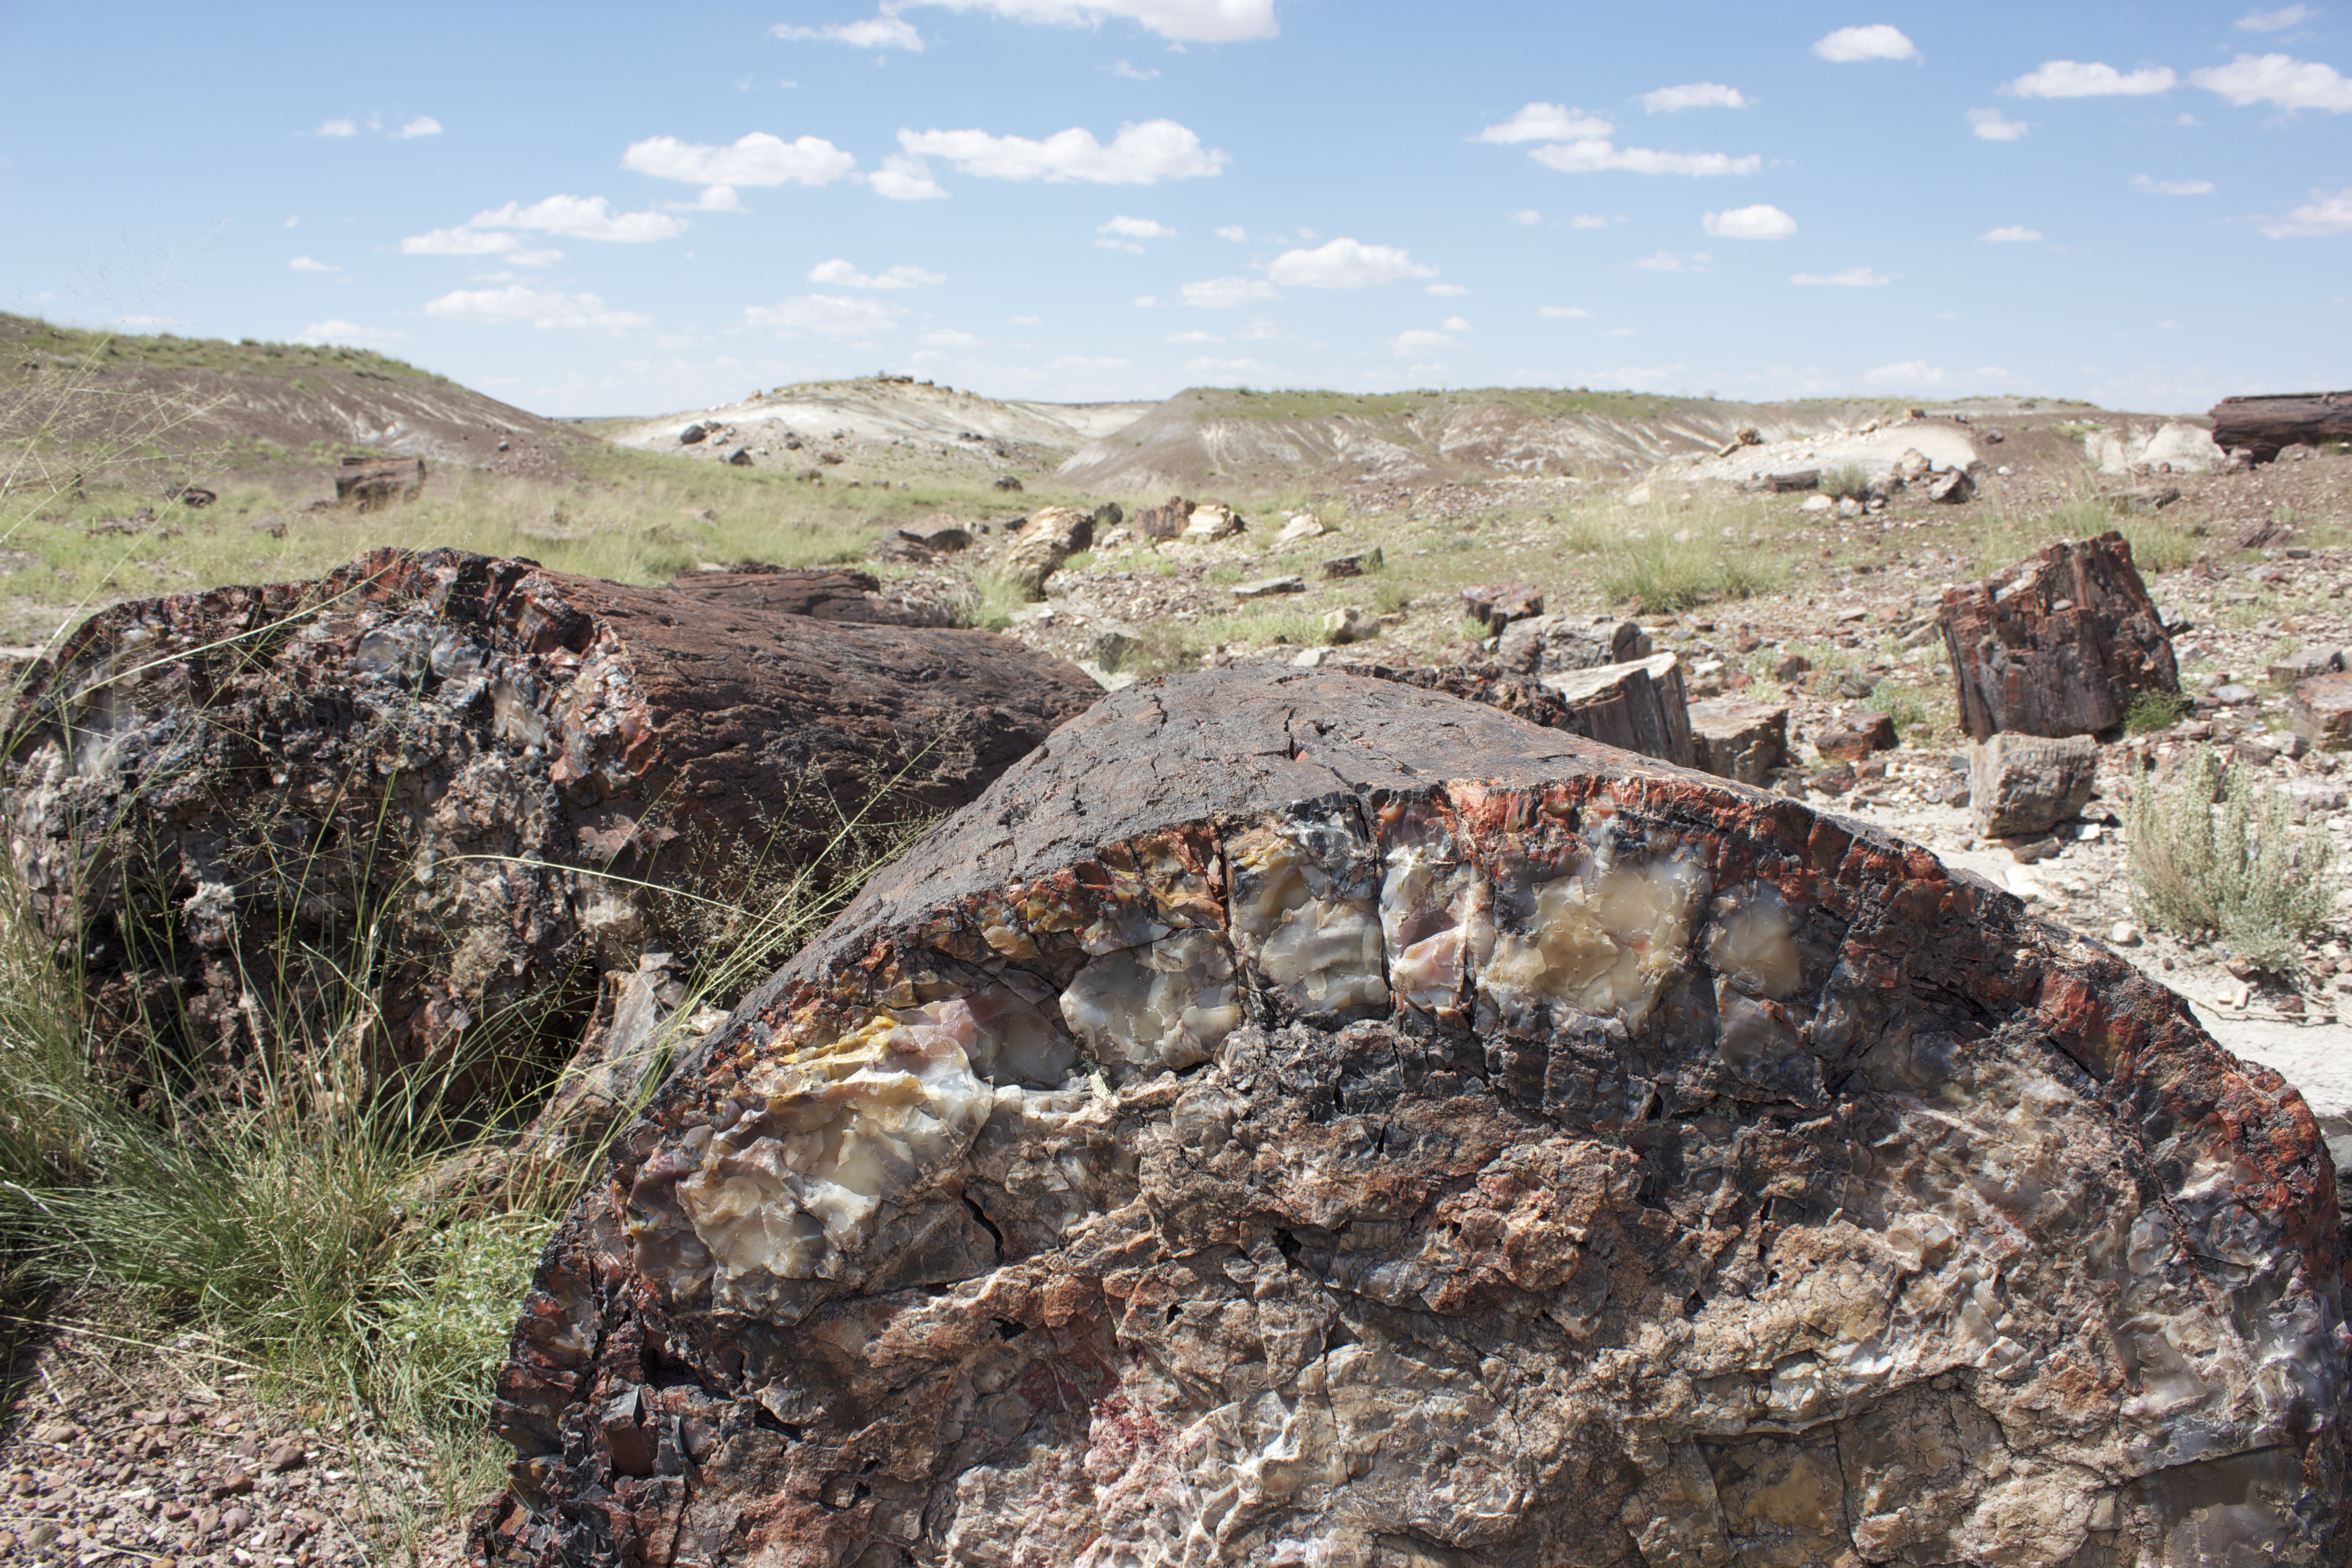 Petrified wood in this desolate landscape has been fossilized and turned to stone. 